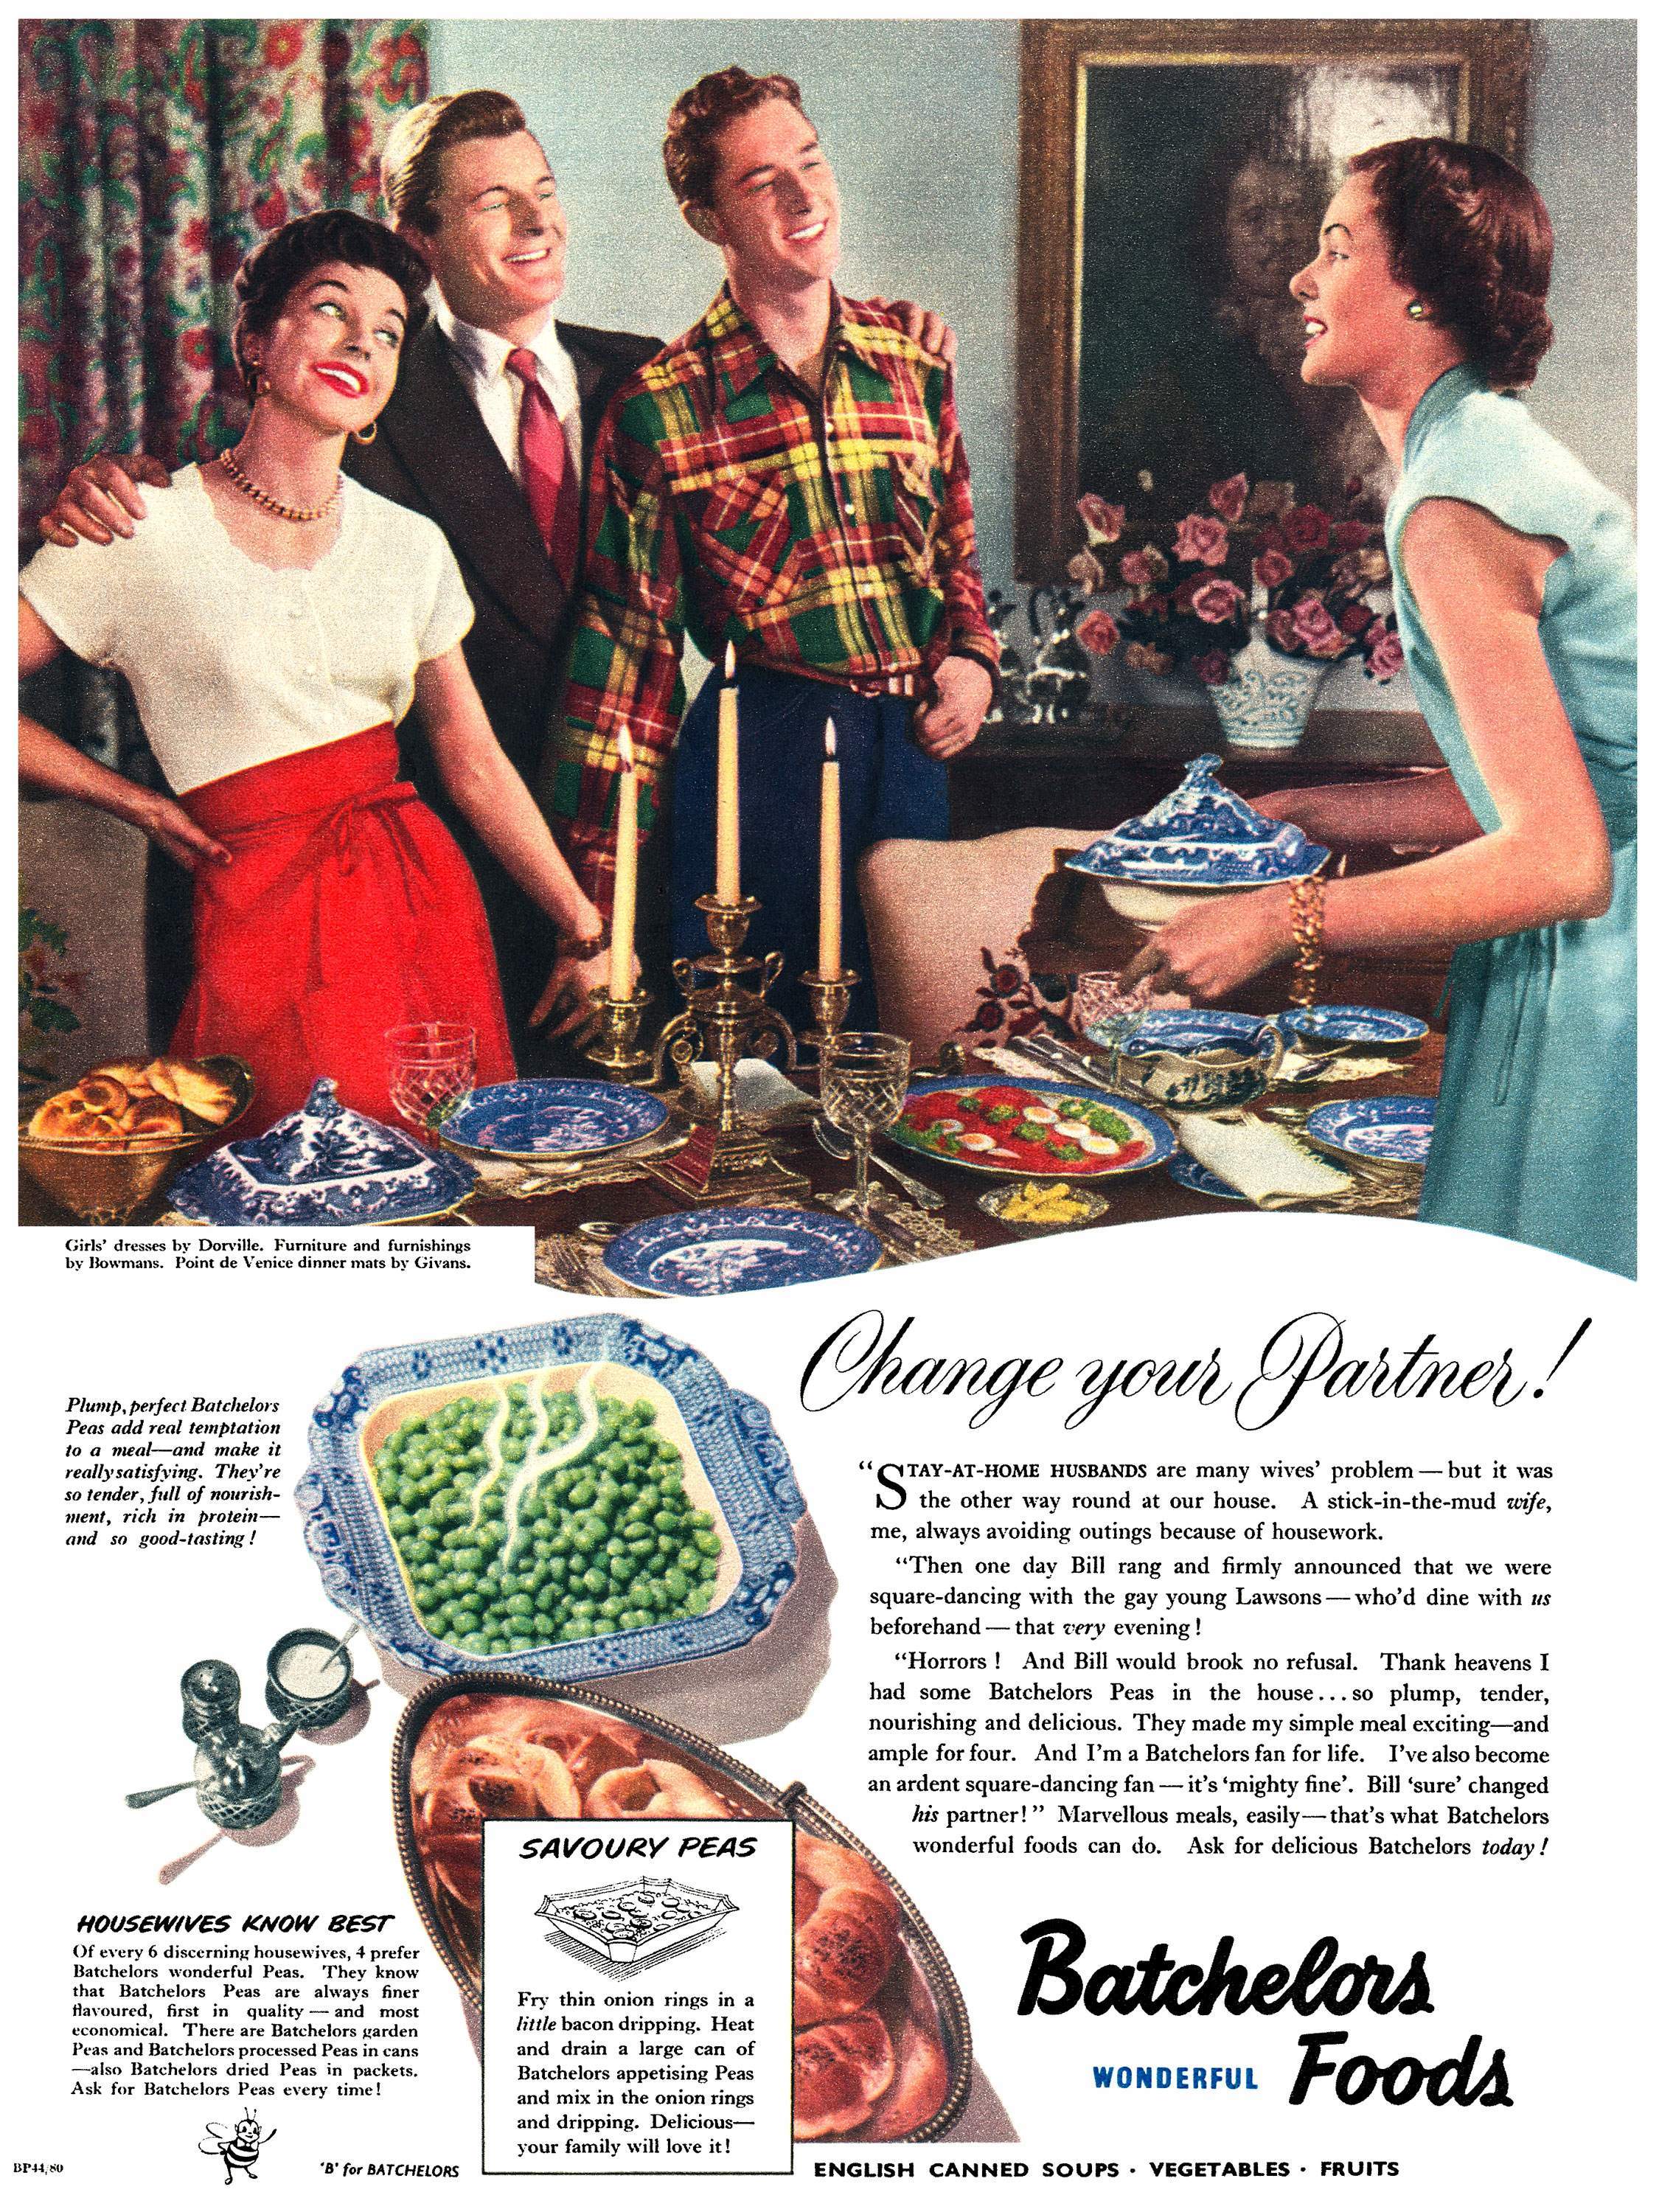 The Batchelors Foods Soup-Opera ads from the 1950s